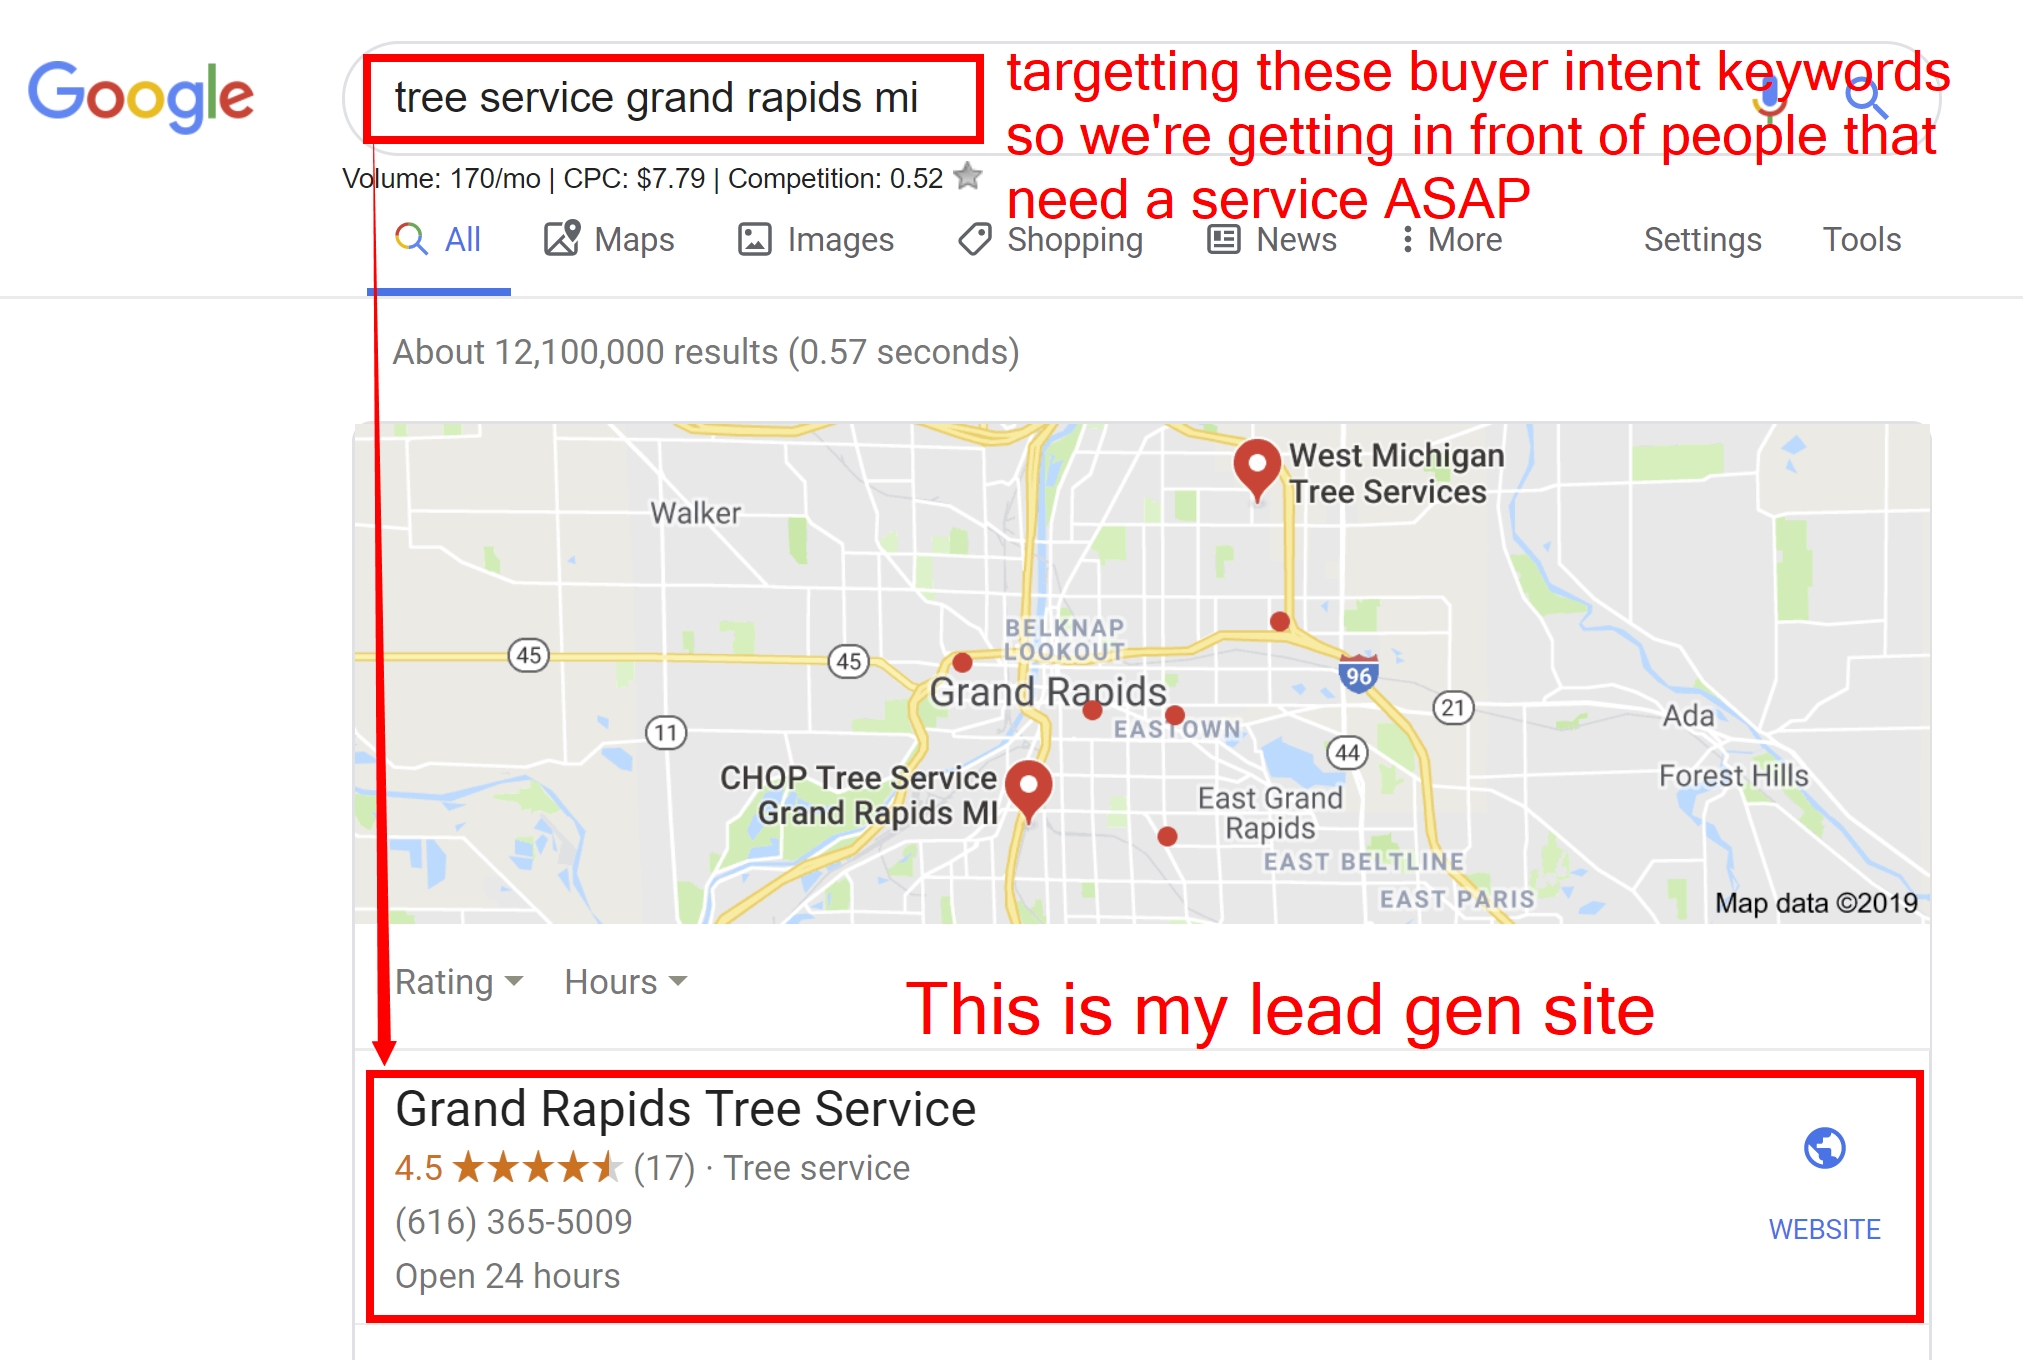 I have many lead generation sites that rank #1 on Google